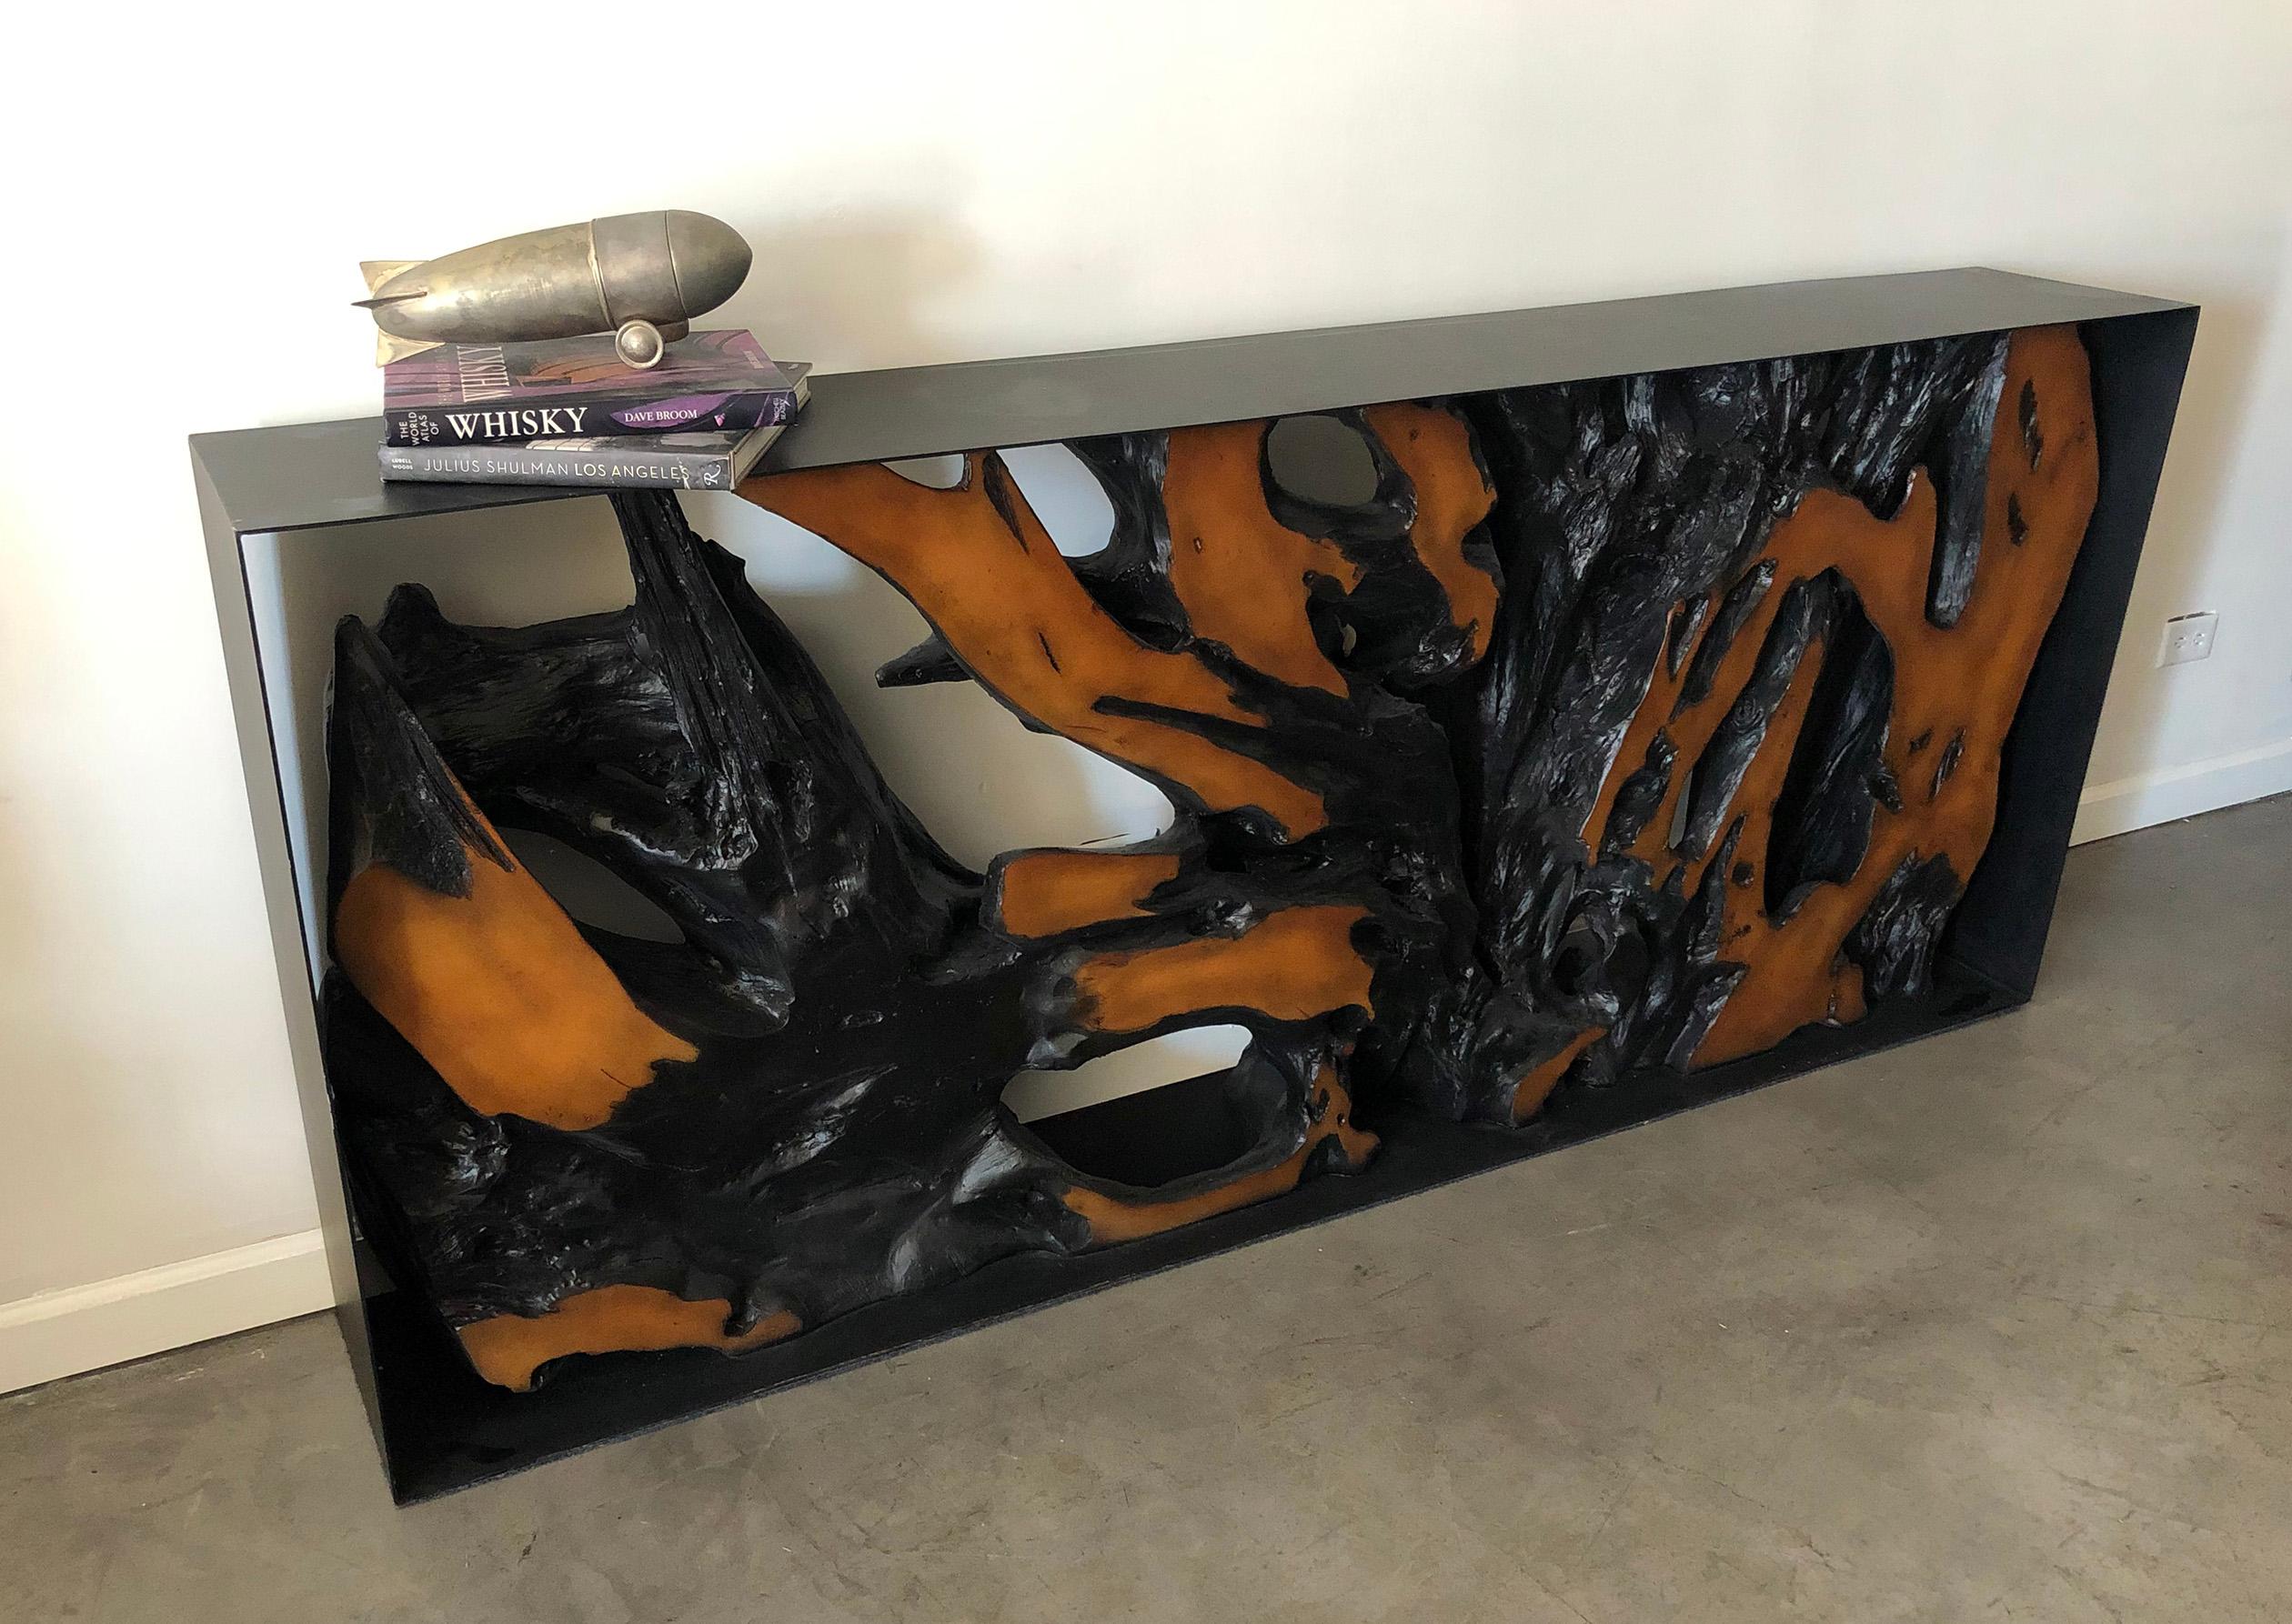 A stunning find, this console table brings warmth and modernism to any space. This piece features a faux cast root / tree specimen encased within a black, modern, iron frame.